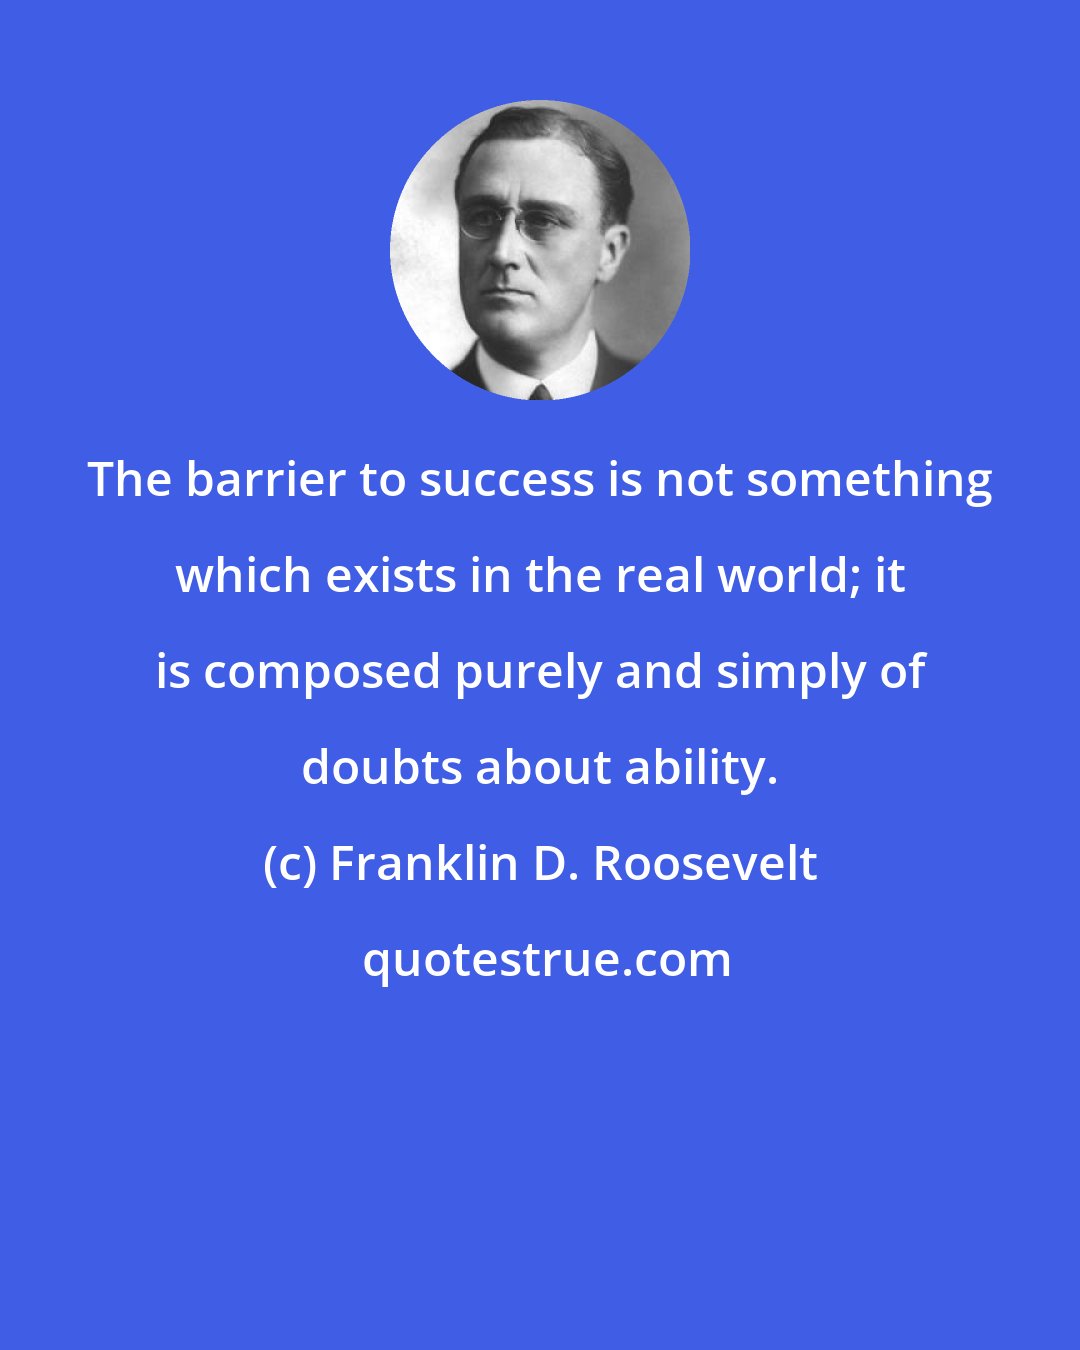 Franklin D. Roosevelt: The barrier to success is not something which exists in the real world; it is composed purely and simply of doubts about ability.